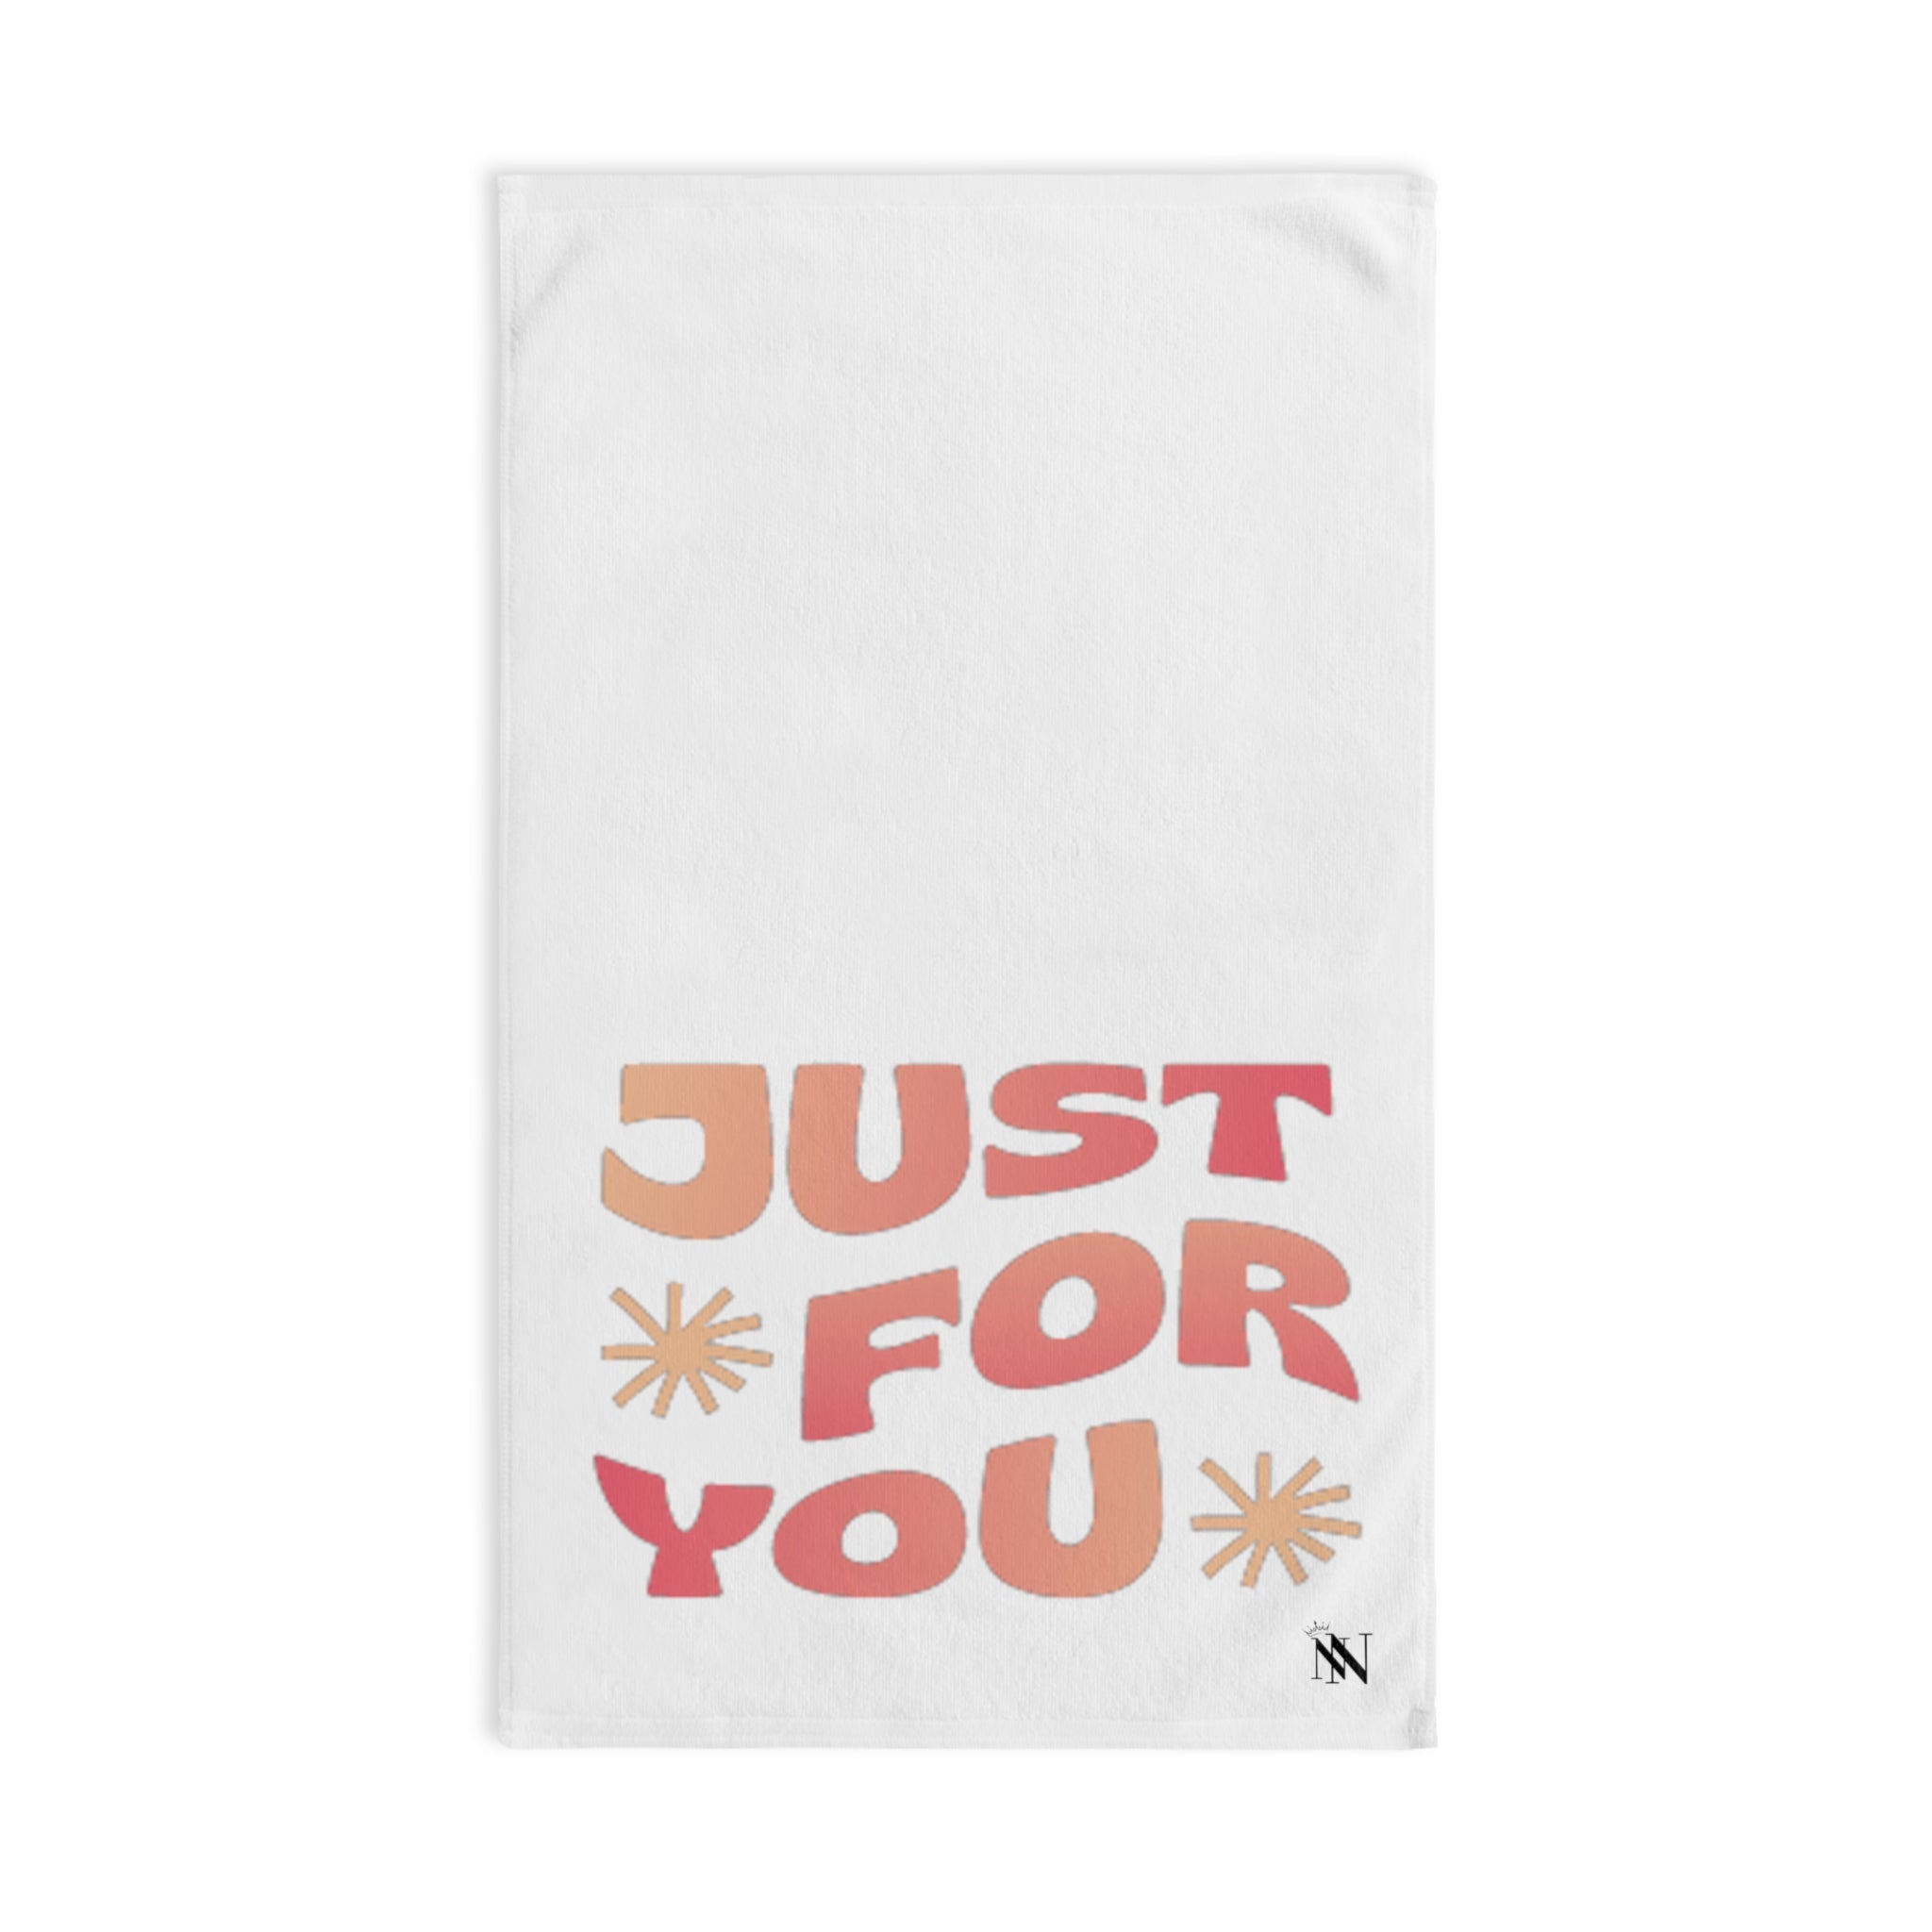 Just For YouWhite | Funny Gifts for Men - Gifts for Him - Birthday Gifts for Men, Him, Her, Husband, Boyfriend, Girlfriend, New Couple Gifts, Fathers & Valentines Day Gifts, Christmas Gifts NECTAR NAPKINS